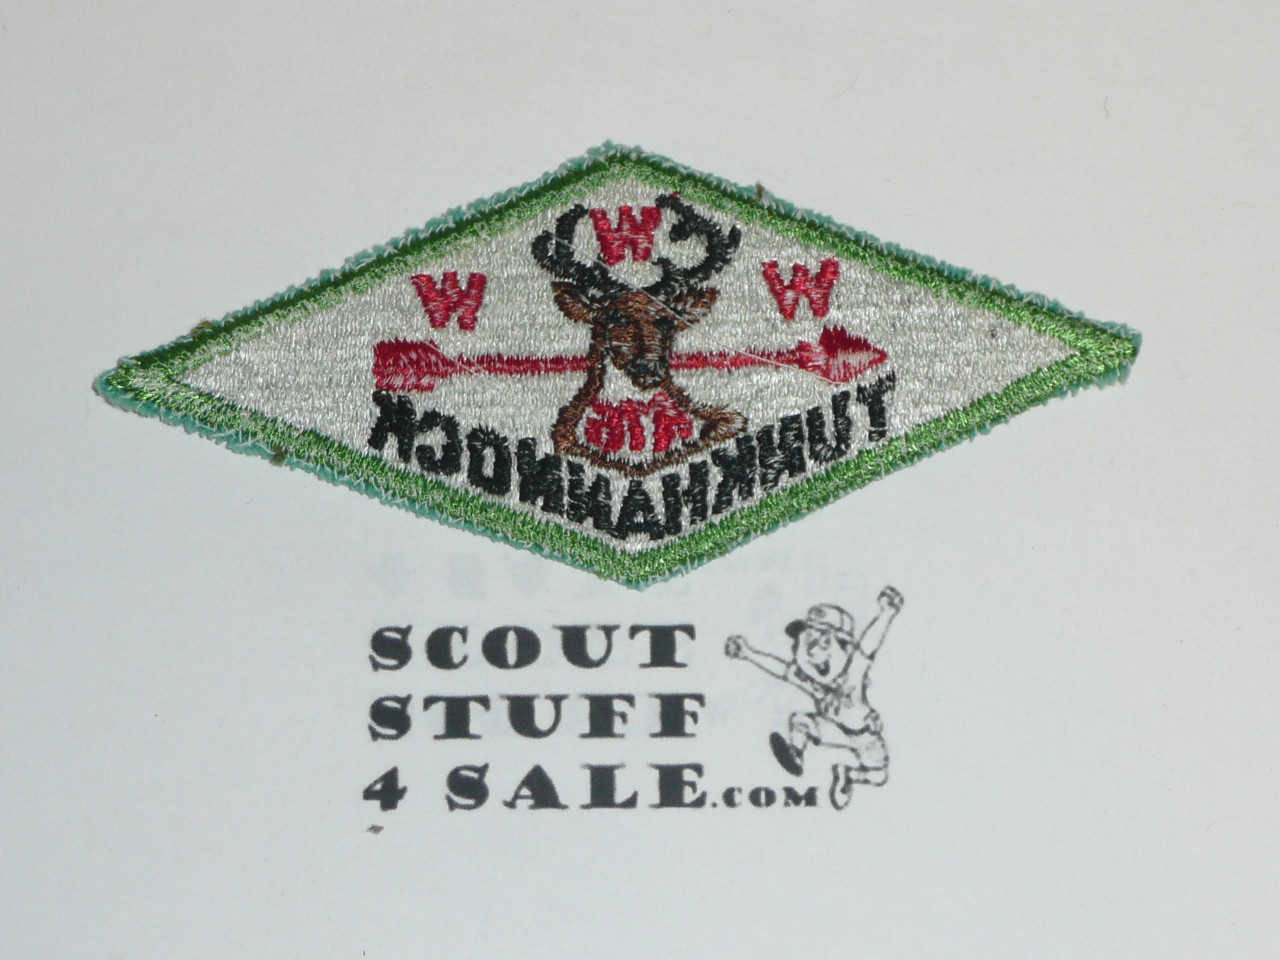 Order of the Arrow Lodge #476 Tunkhannock x3 Patch - Boy Scout